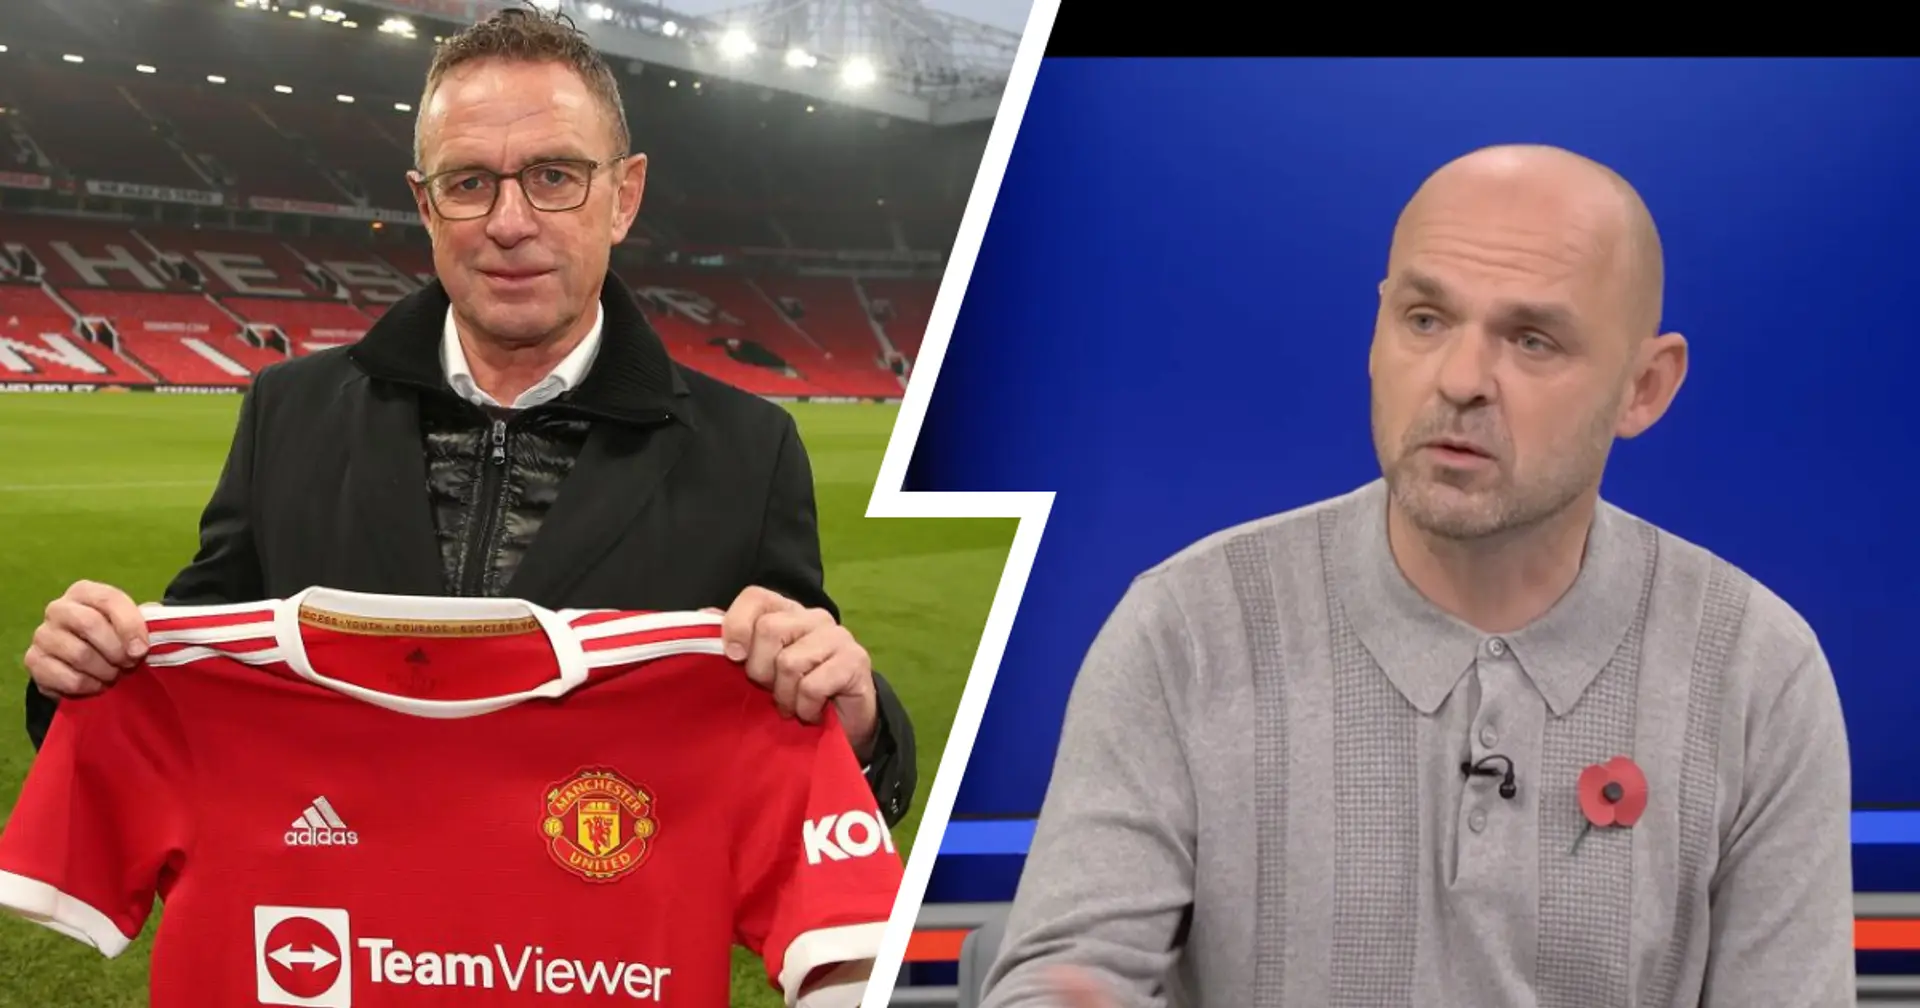 'He has never dealt with that before': Danny Murphy names 2 biggest obstacles Rangnick has to overcome